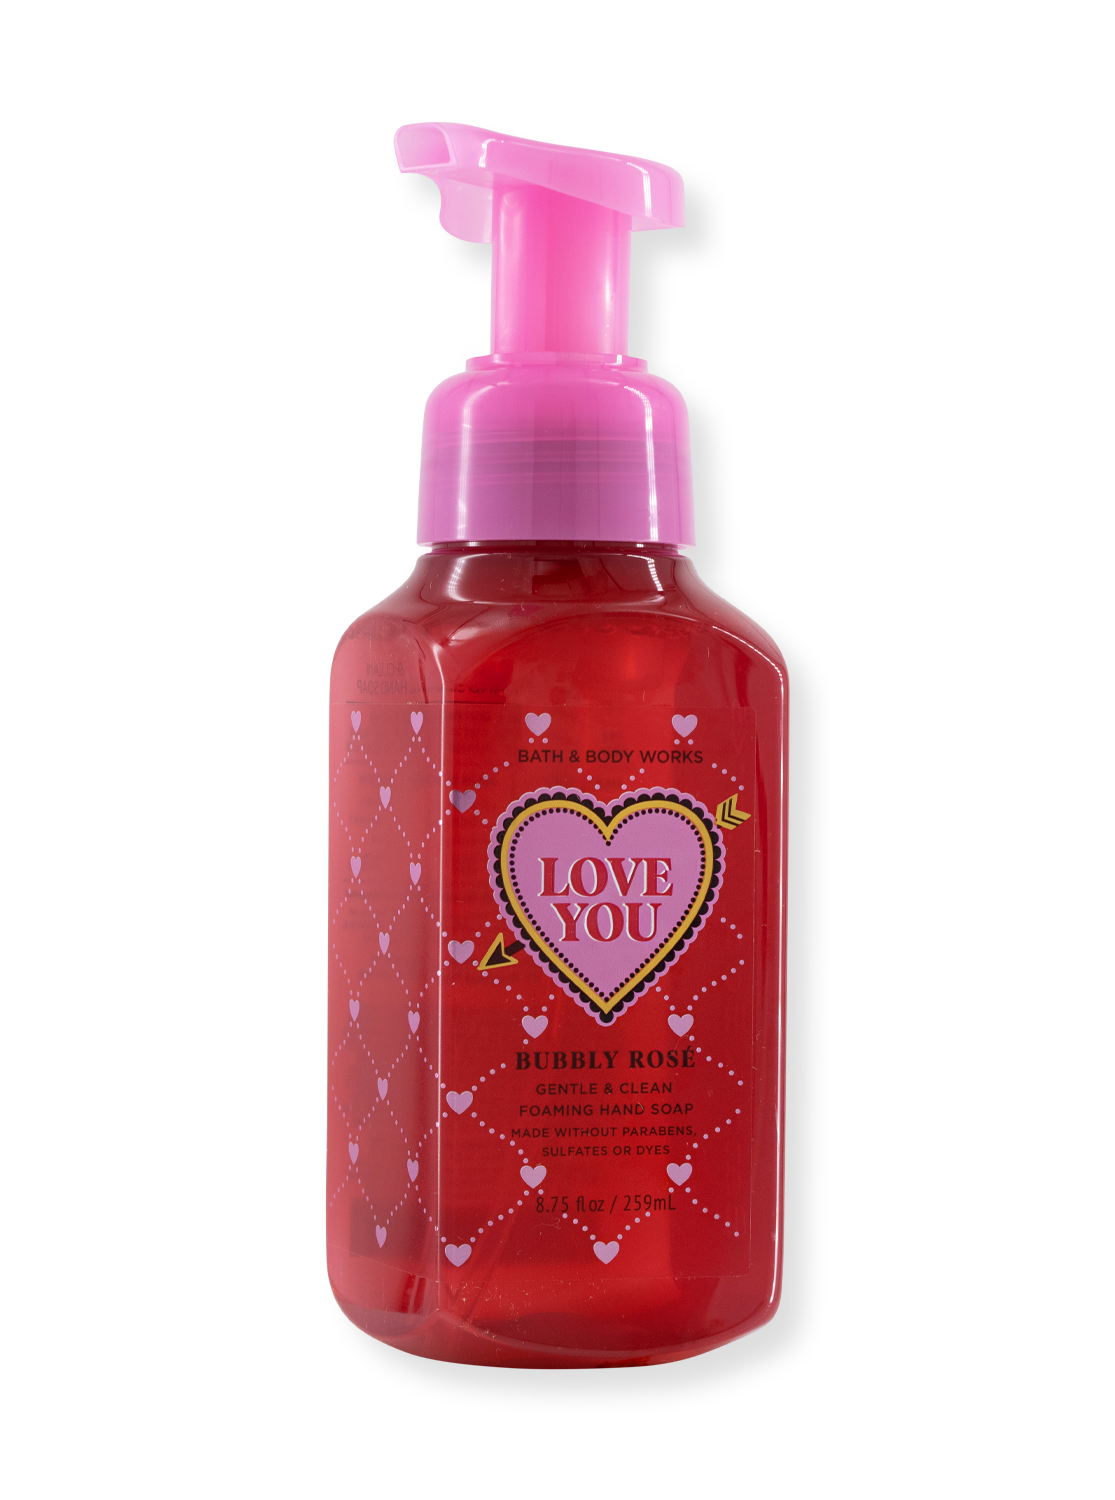 Schaumseife - Love You - Bubbly rose - Limited Edition - 259ml